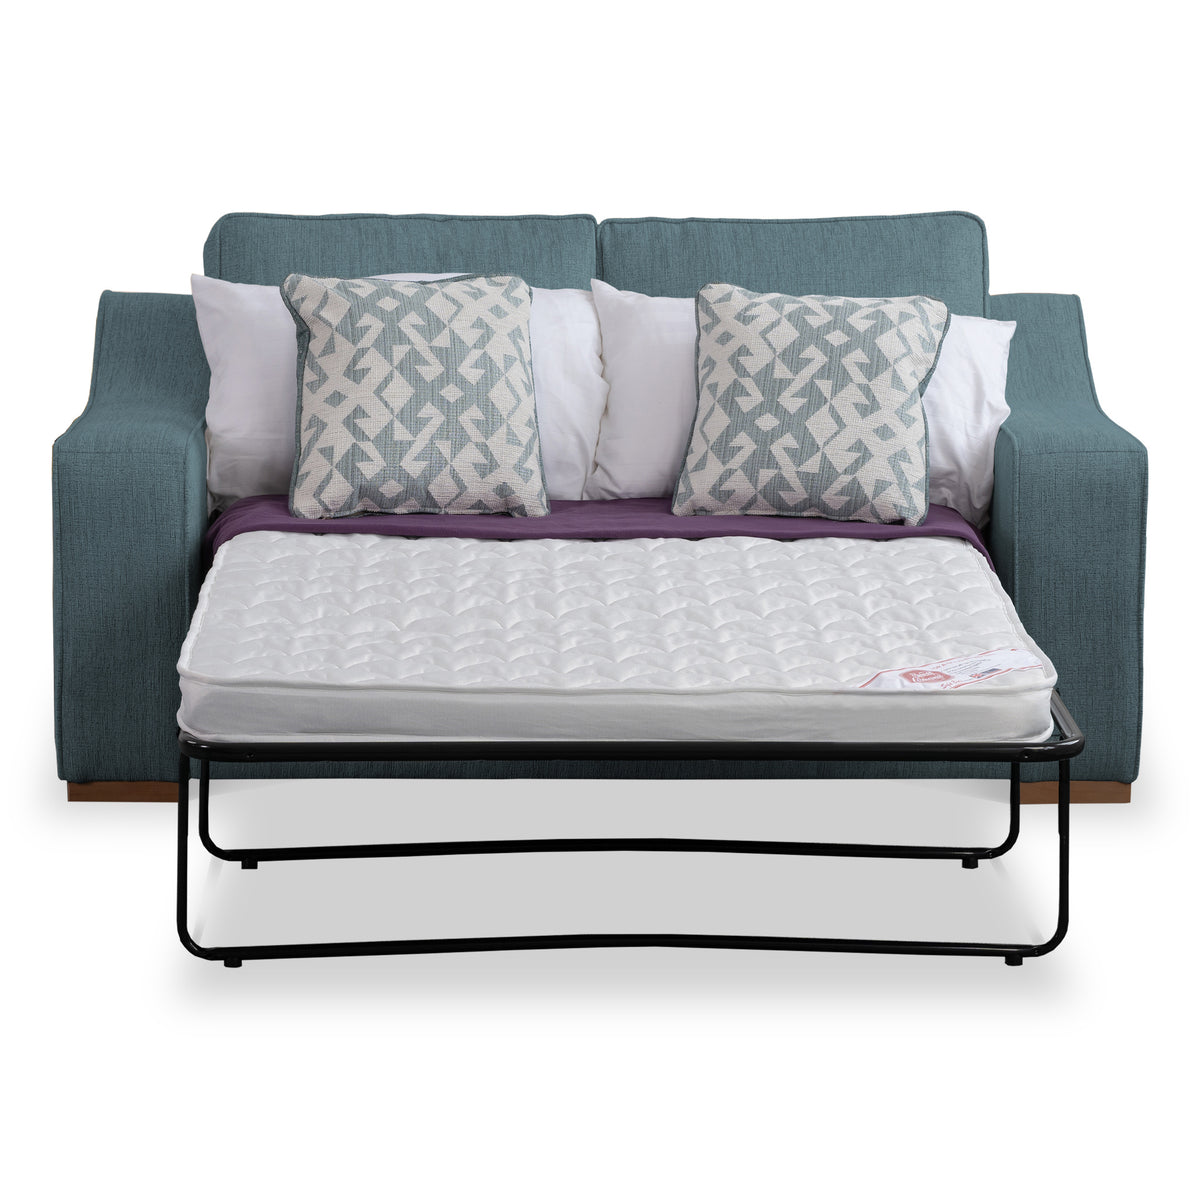 Grantham 2 Seater Sofabed from Roseland Furniture